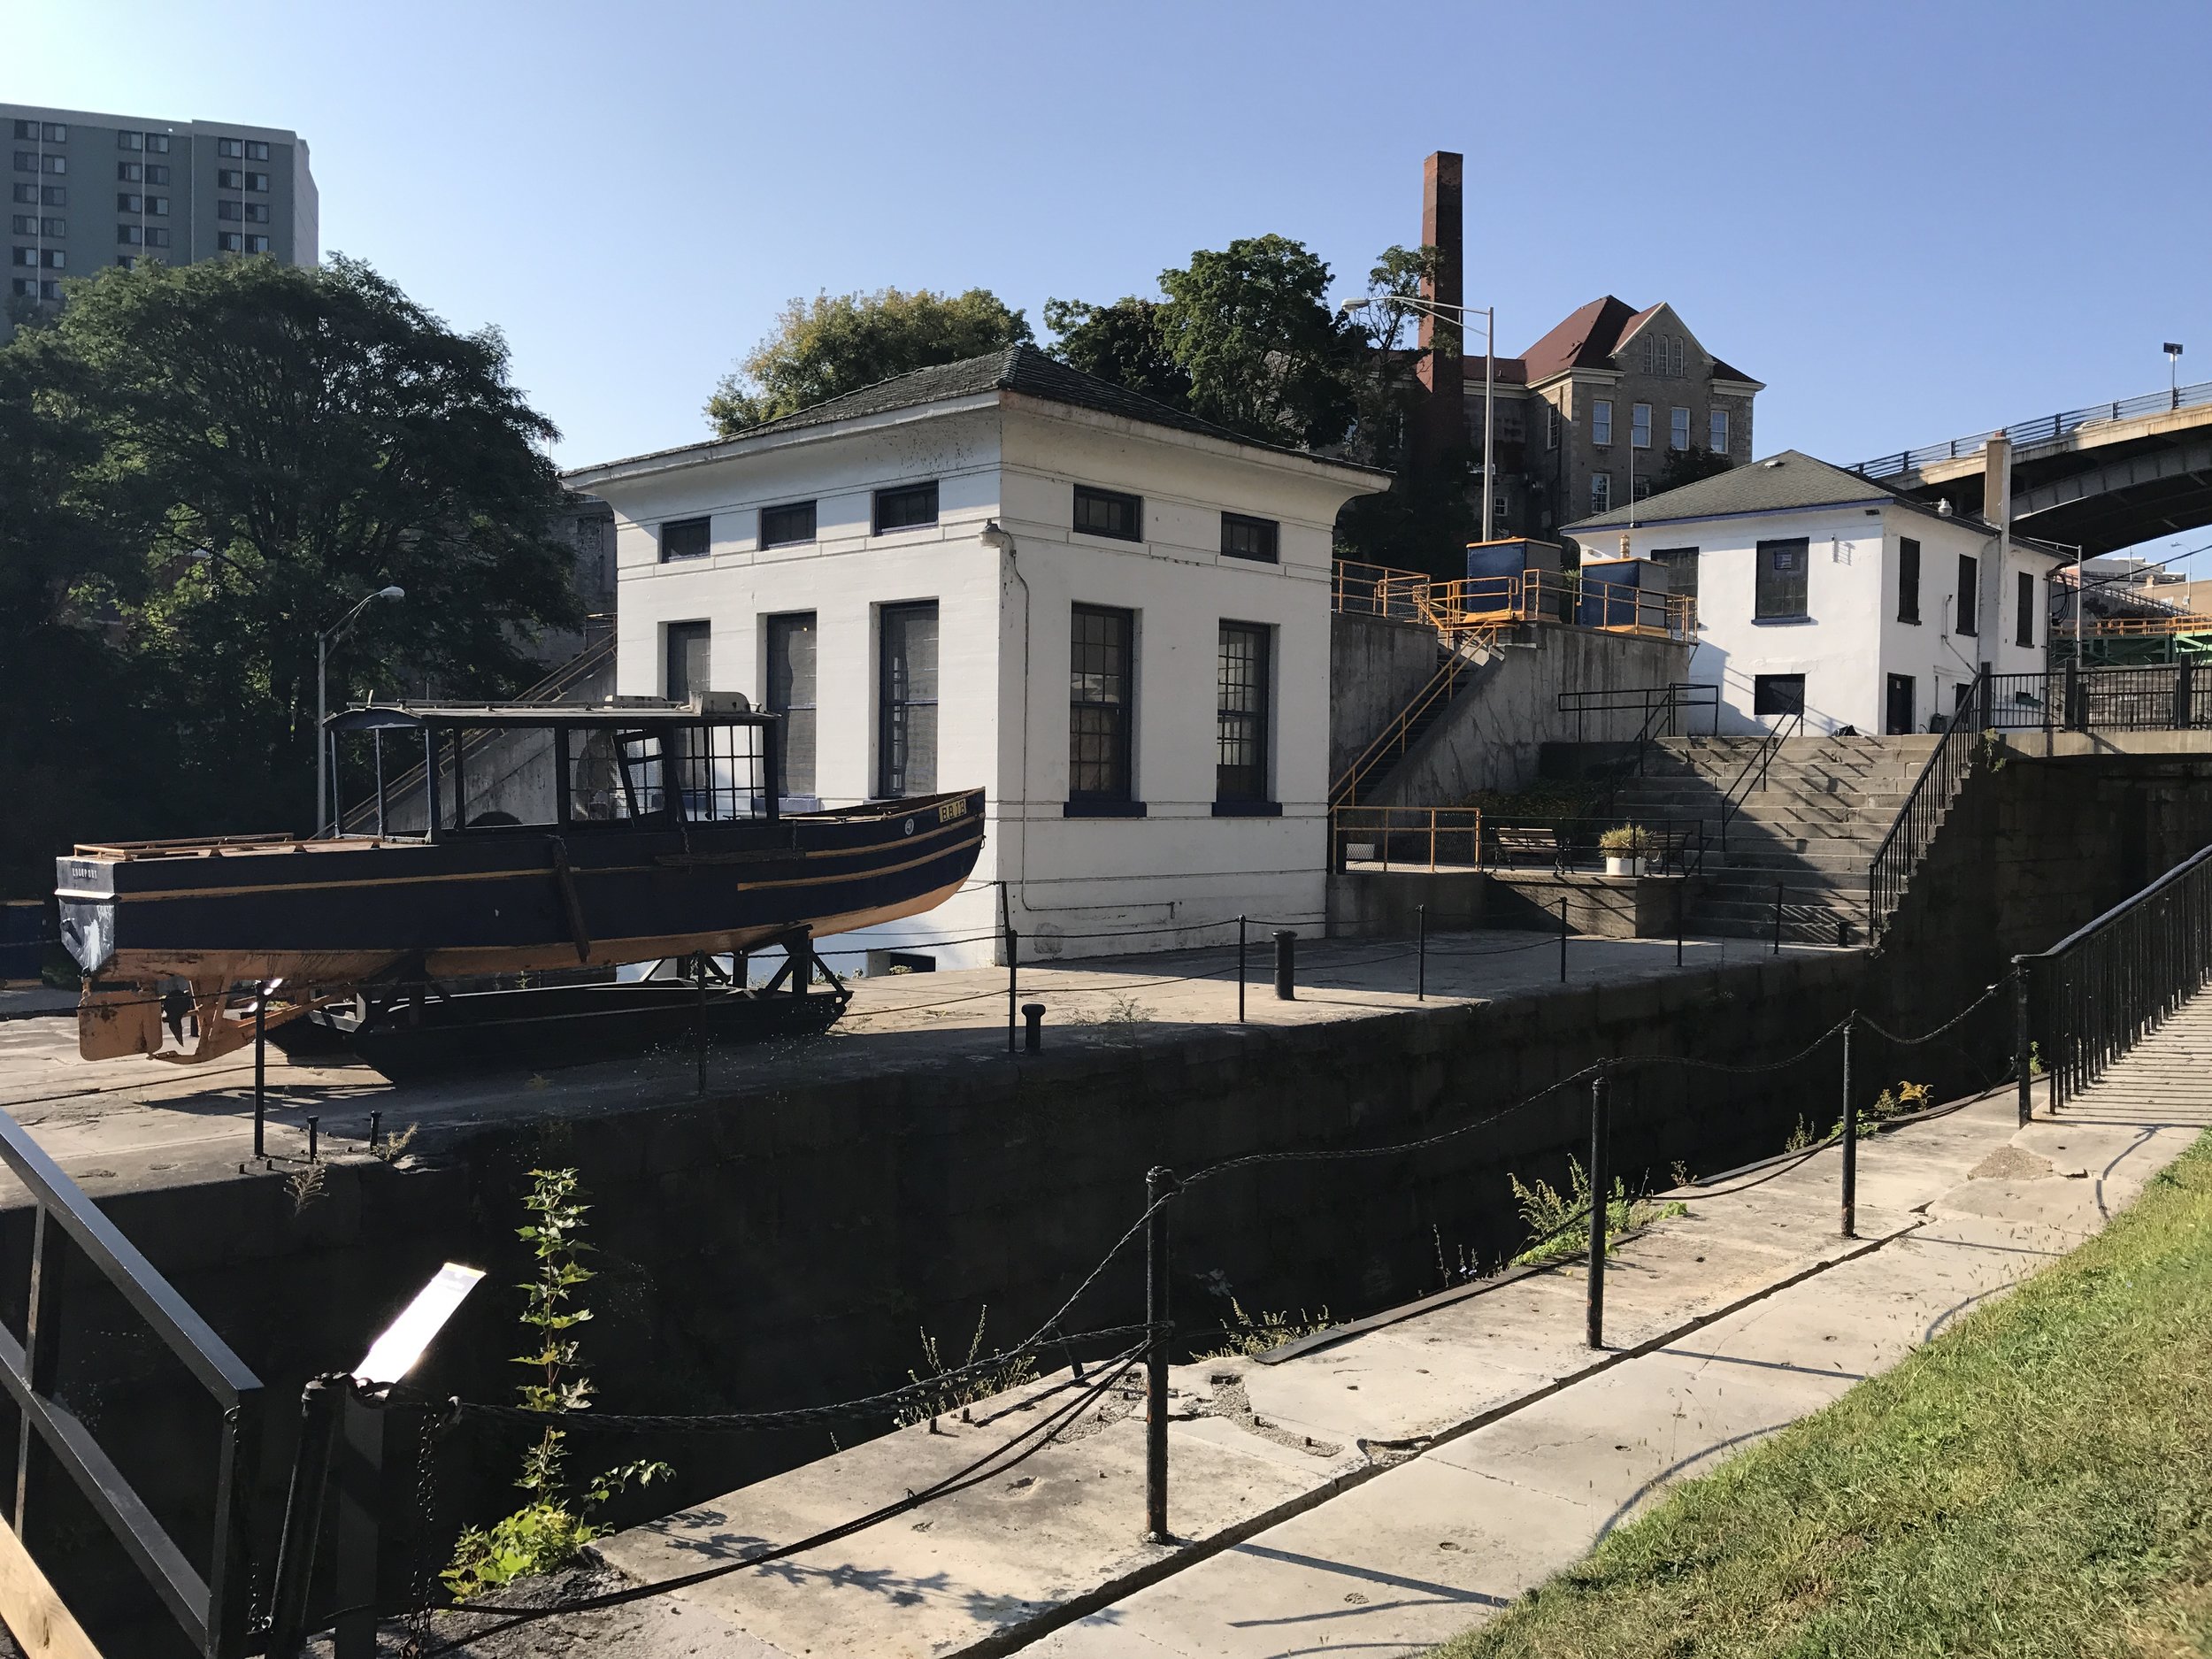 Lock Houses on the Erie Canal